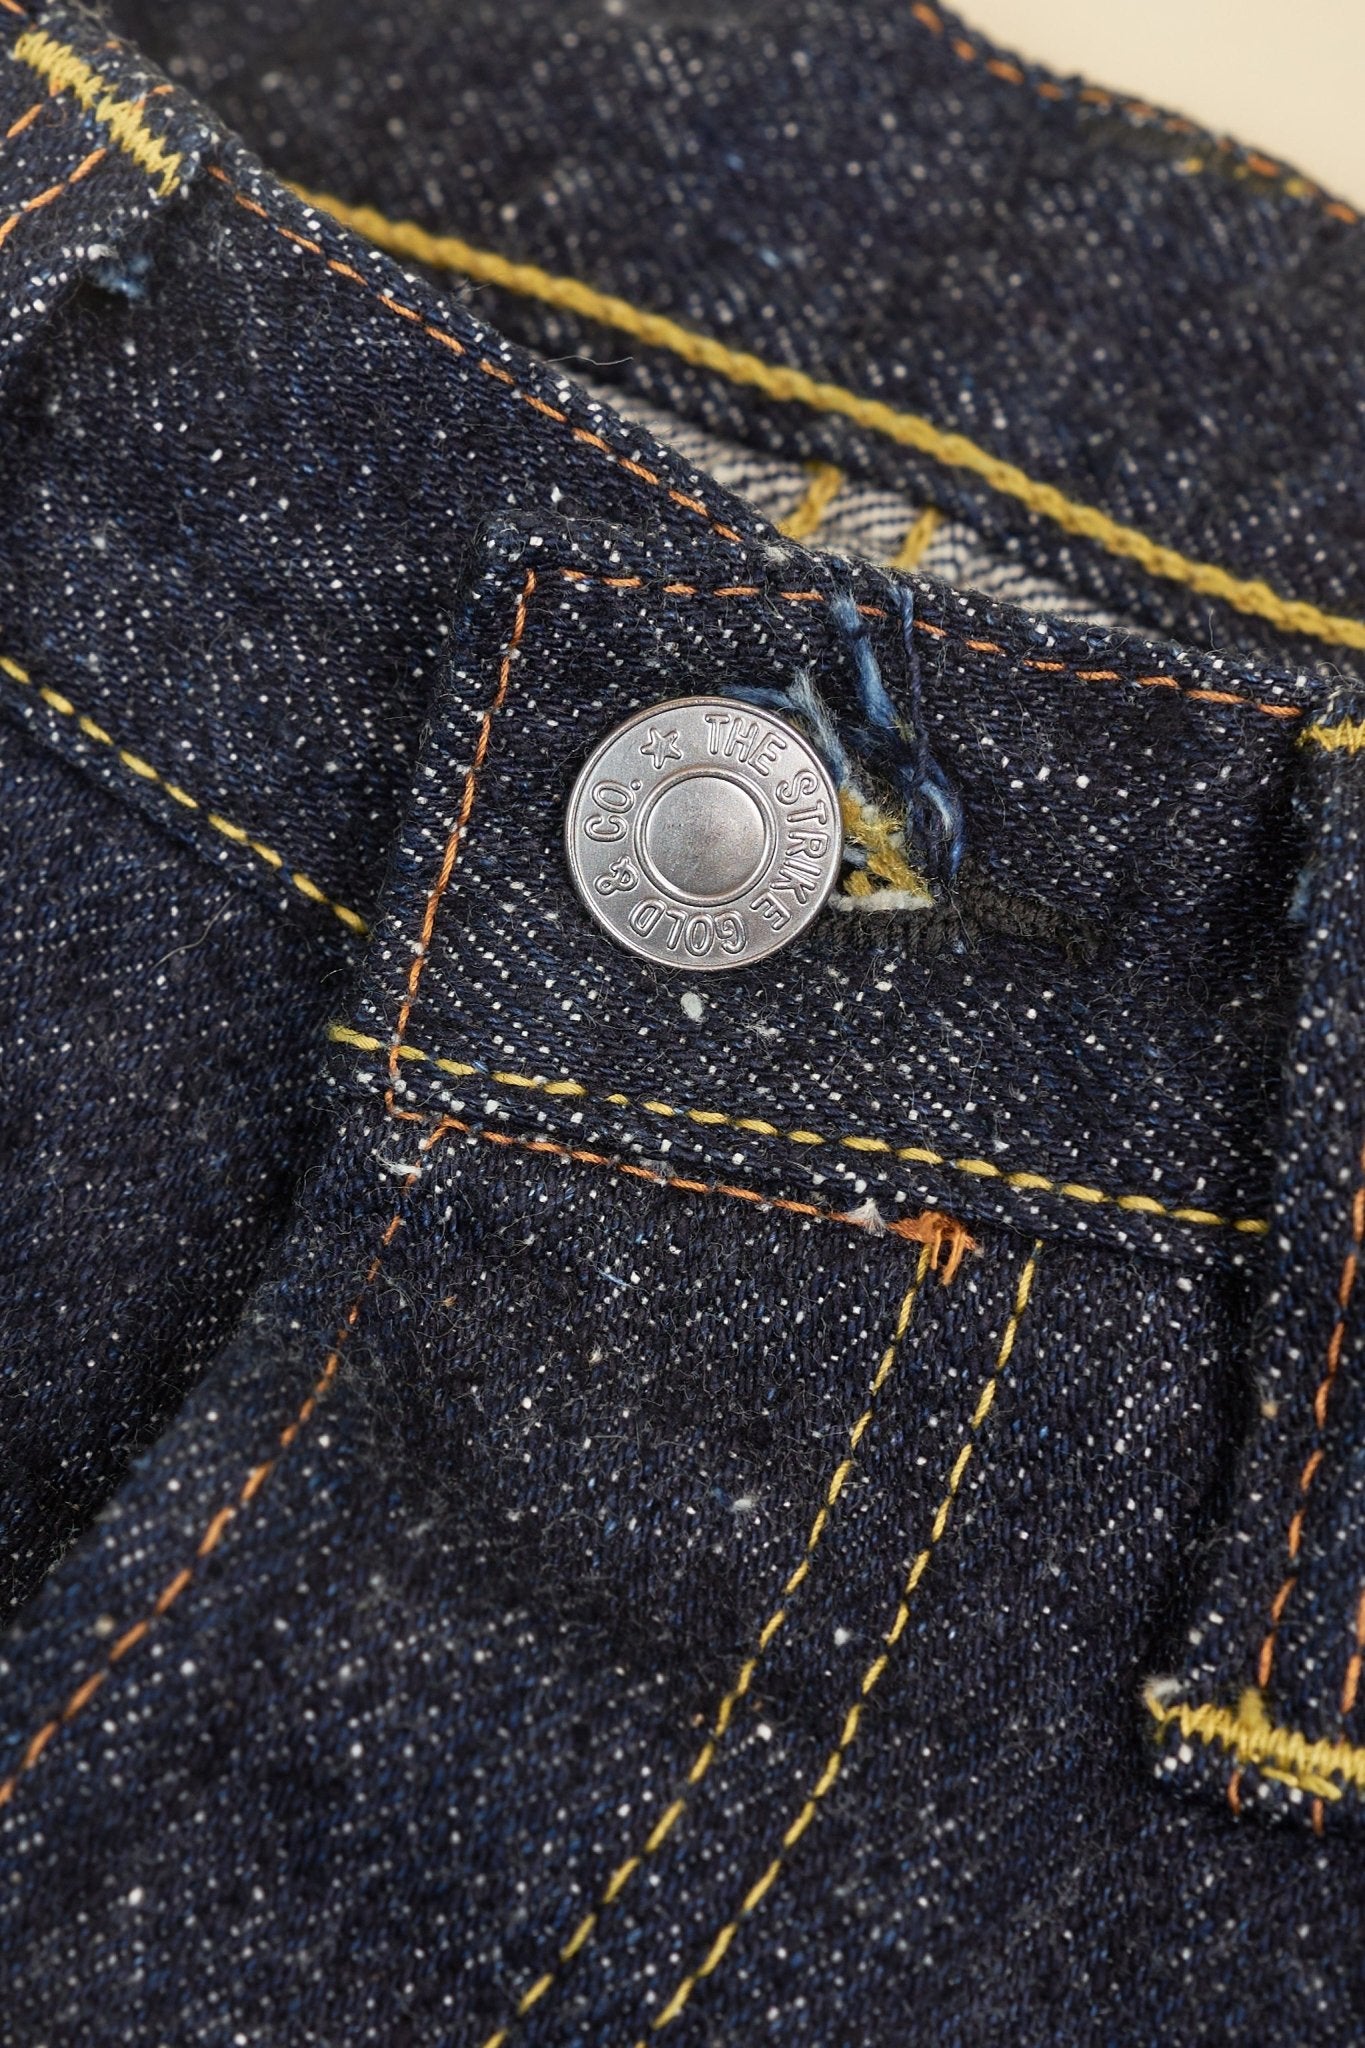 The Strike Gold "Keep Earth" Organic / Recycled Cotton Straight Selvedge Jeans -The Strike Gold - URAHARA